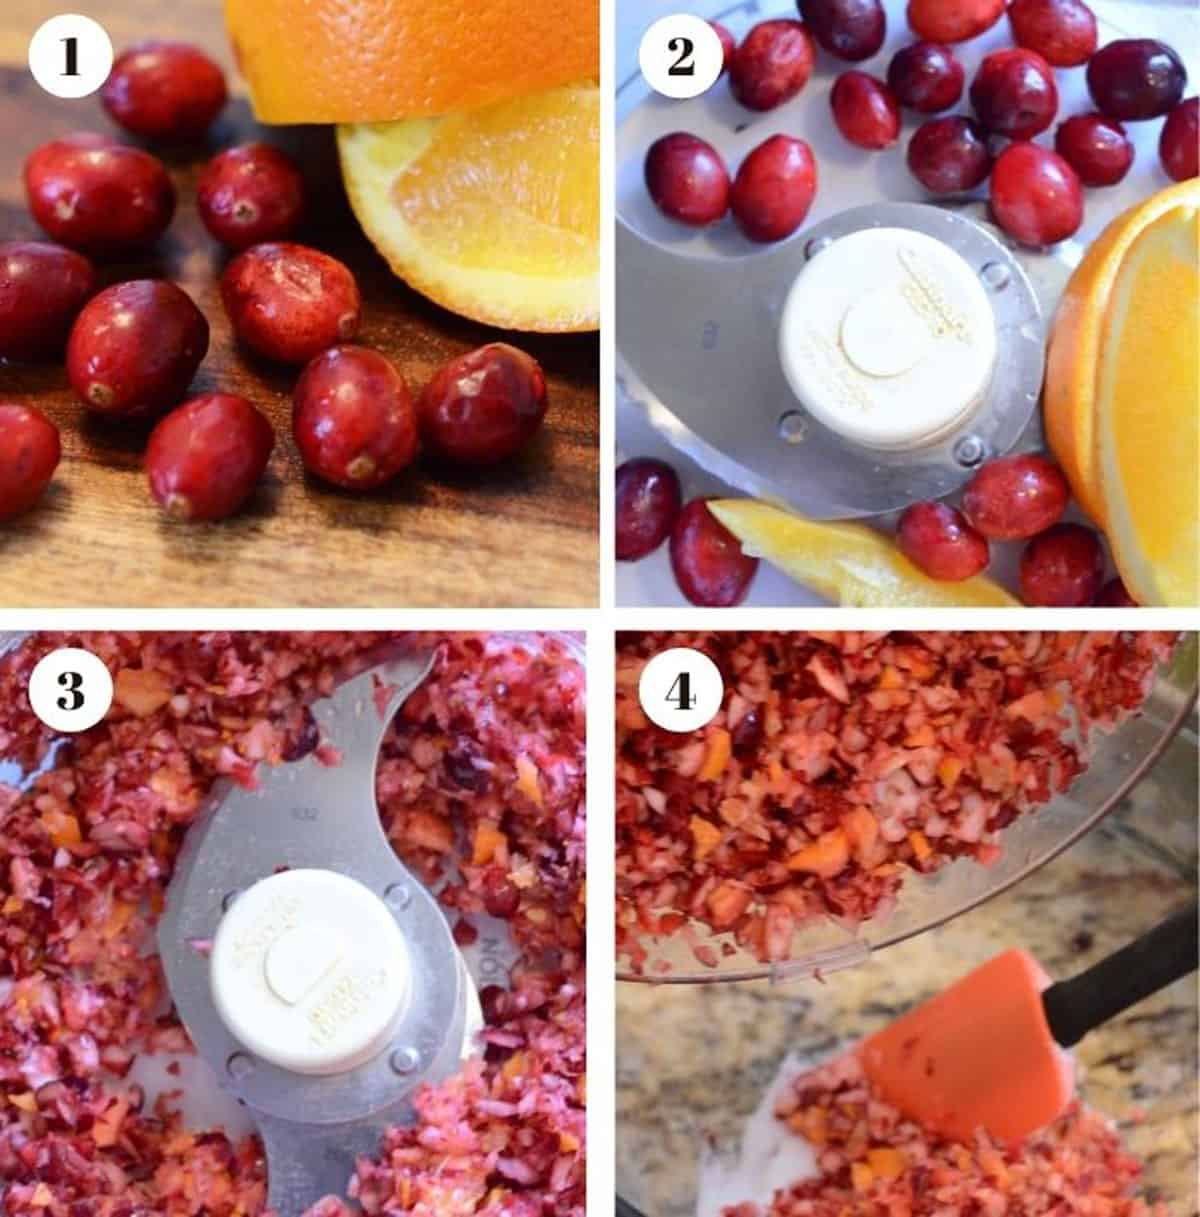 Chopping up fresh cranberries and an orange in a food processor.